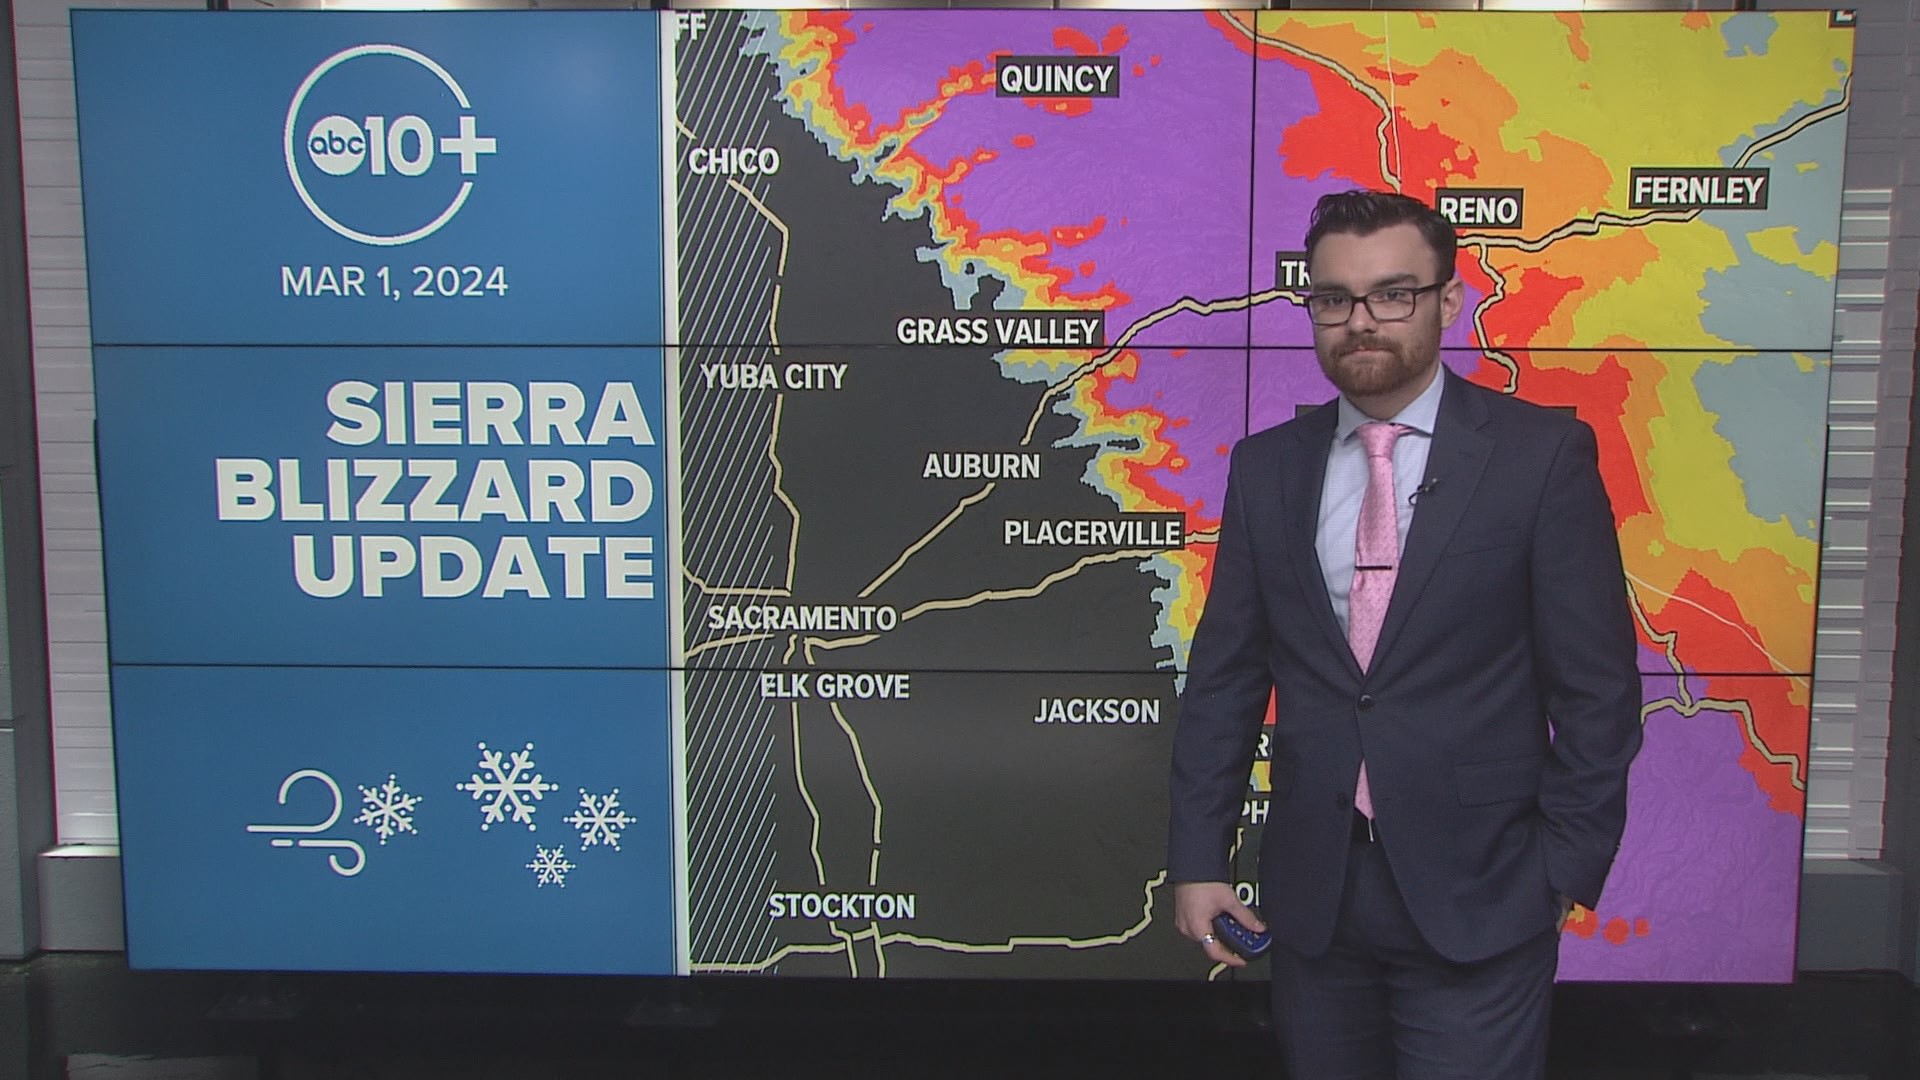 Sierra locations have already picked up one to two feet. Another 6-10 ft still to come! The bulk of the storm arrives this evening. Brenden Mincheff has the latest.